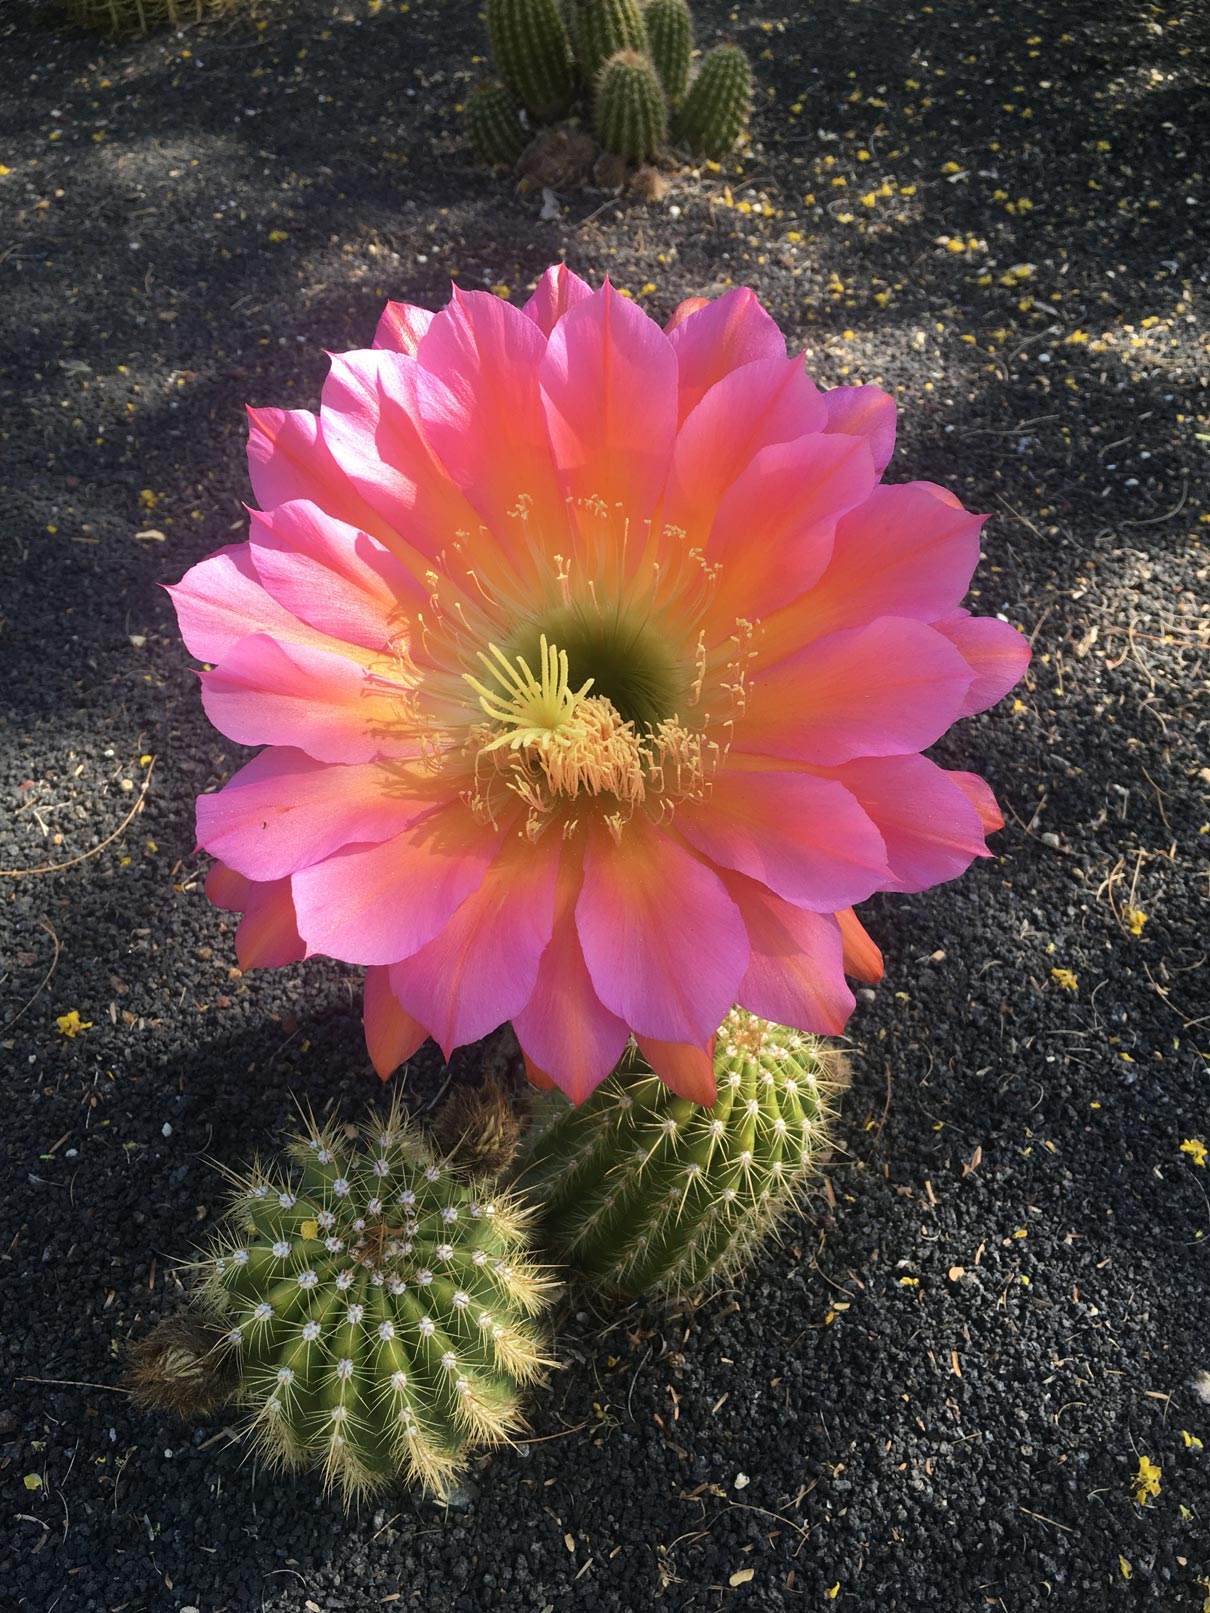 A bright pink flower blooms, dwarfing the small Torch Cactus it blooms on.